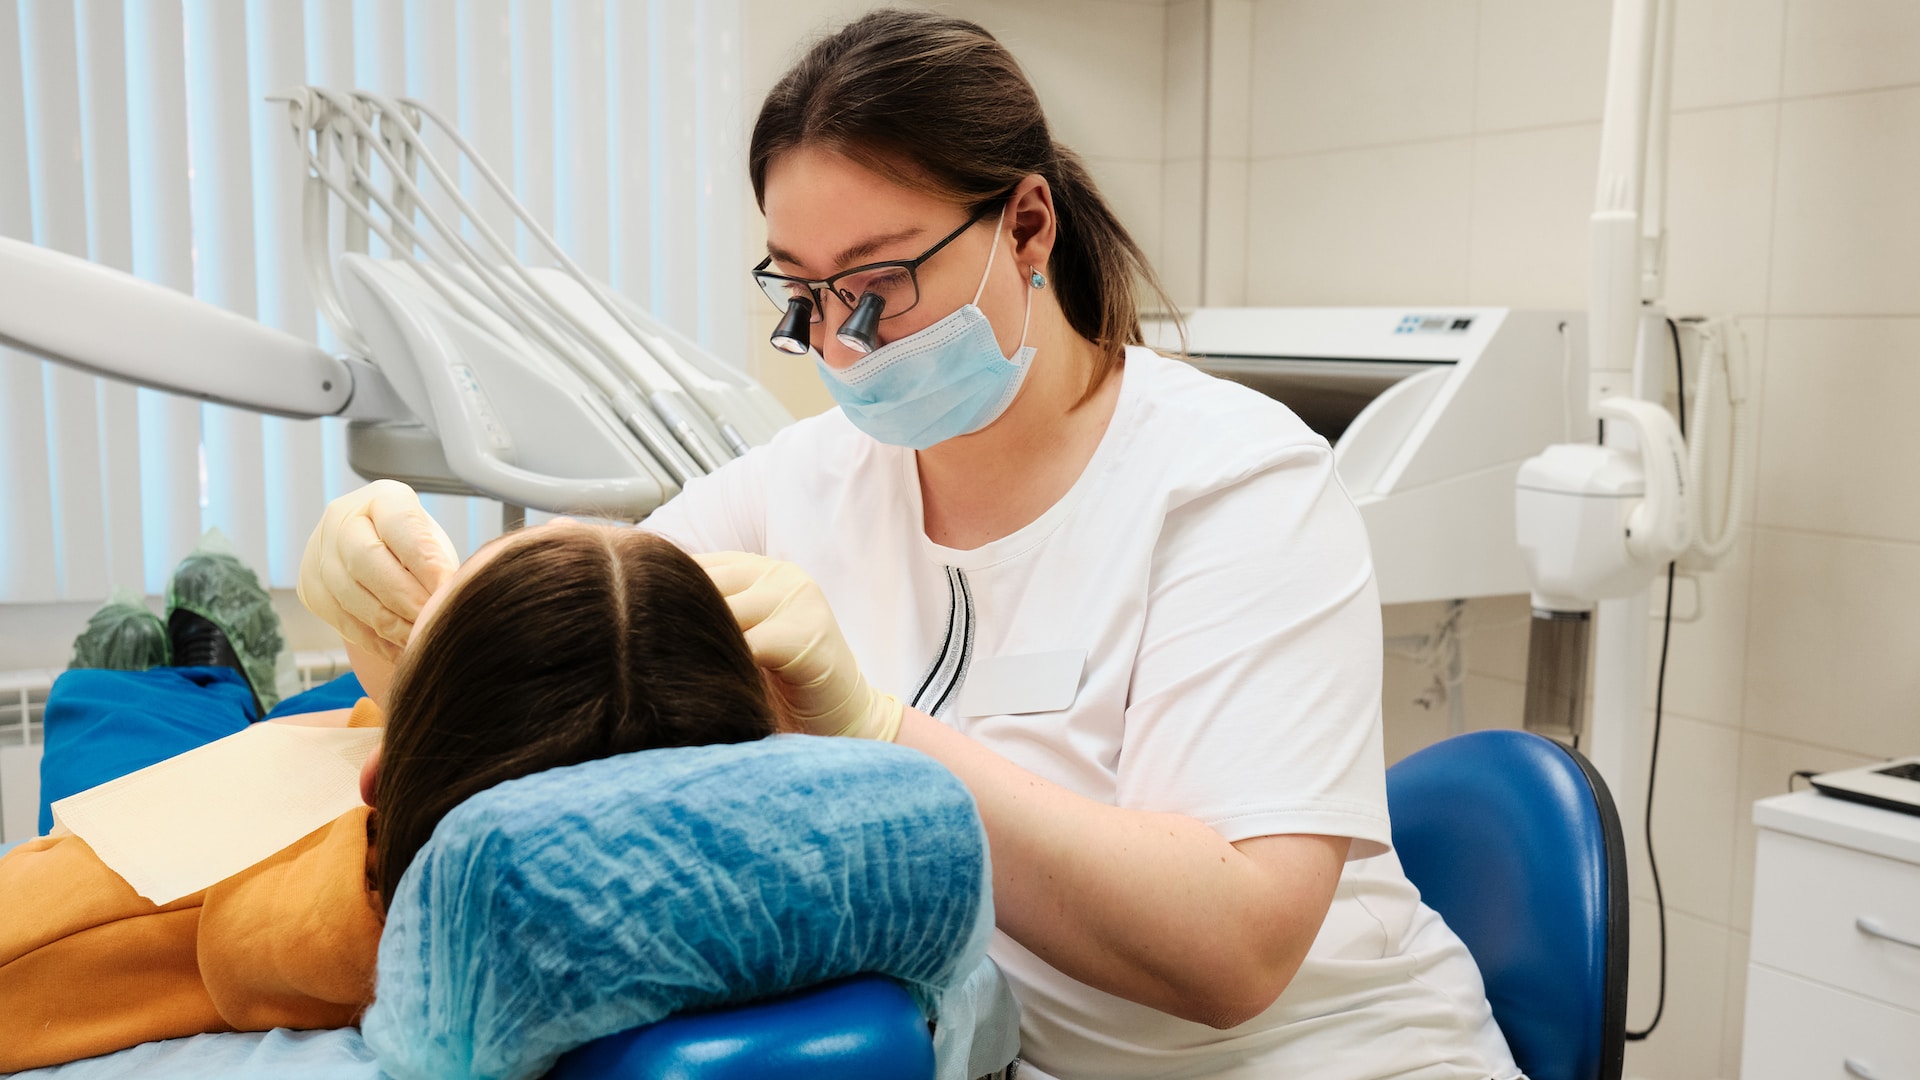 Oral Care in the Heartland: The Rise of Dentistry in Cloverdale